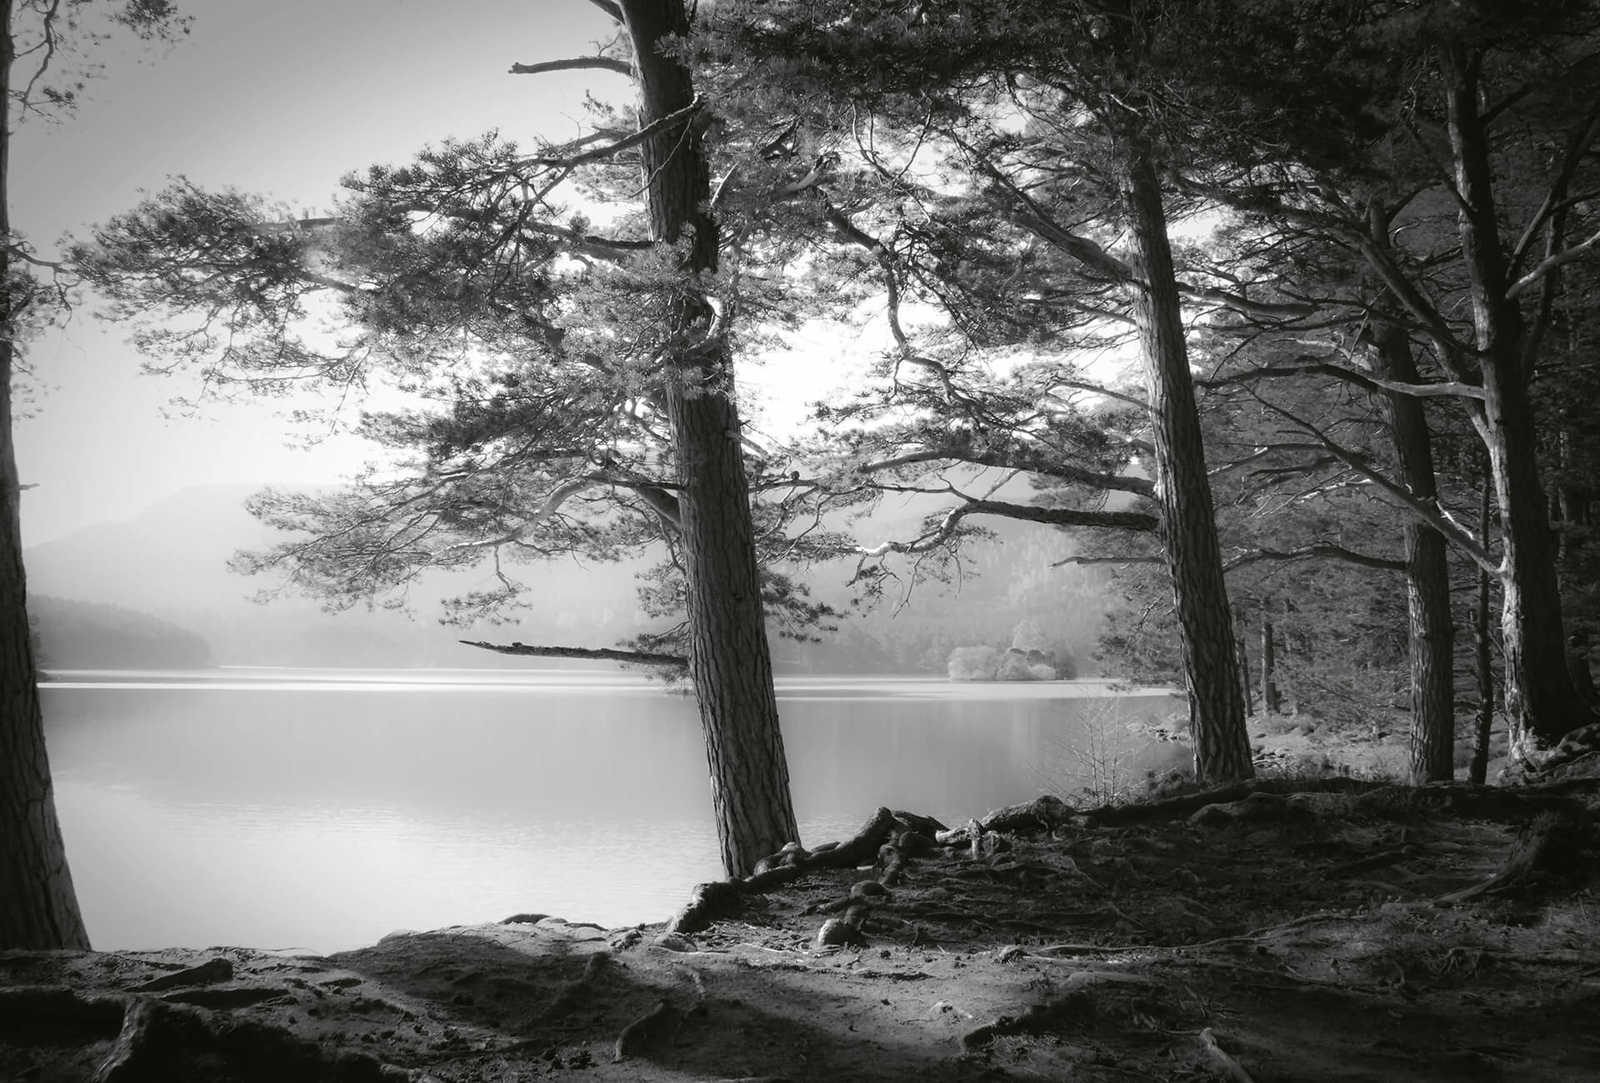 Photo wallpaper forest with lake - black, white, grey
